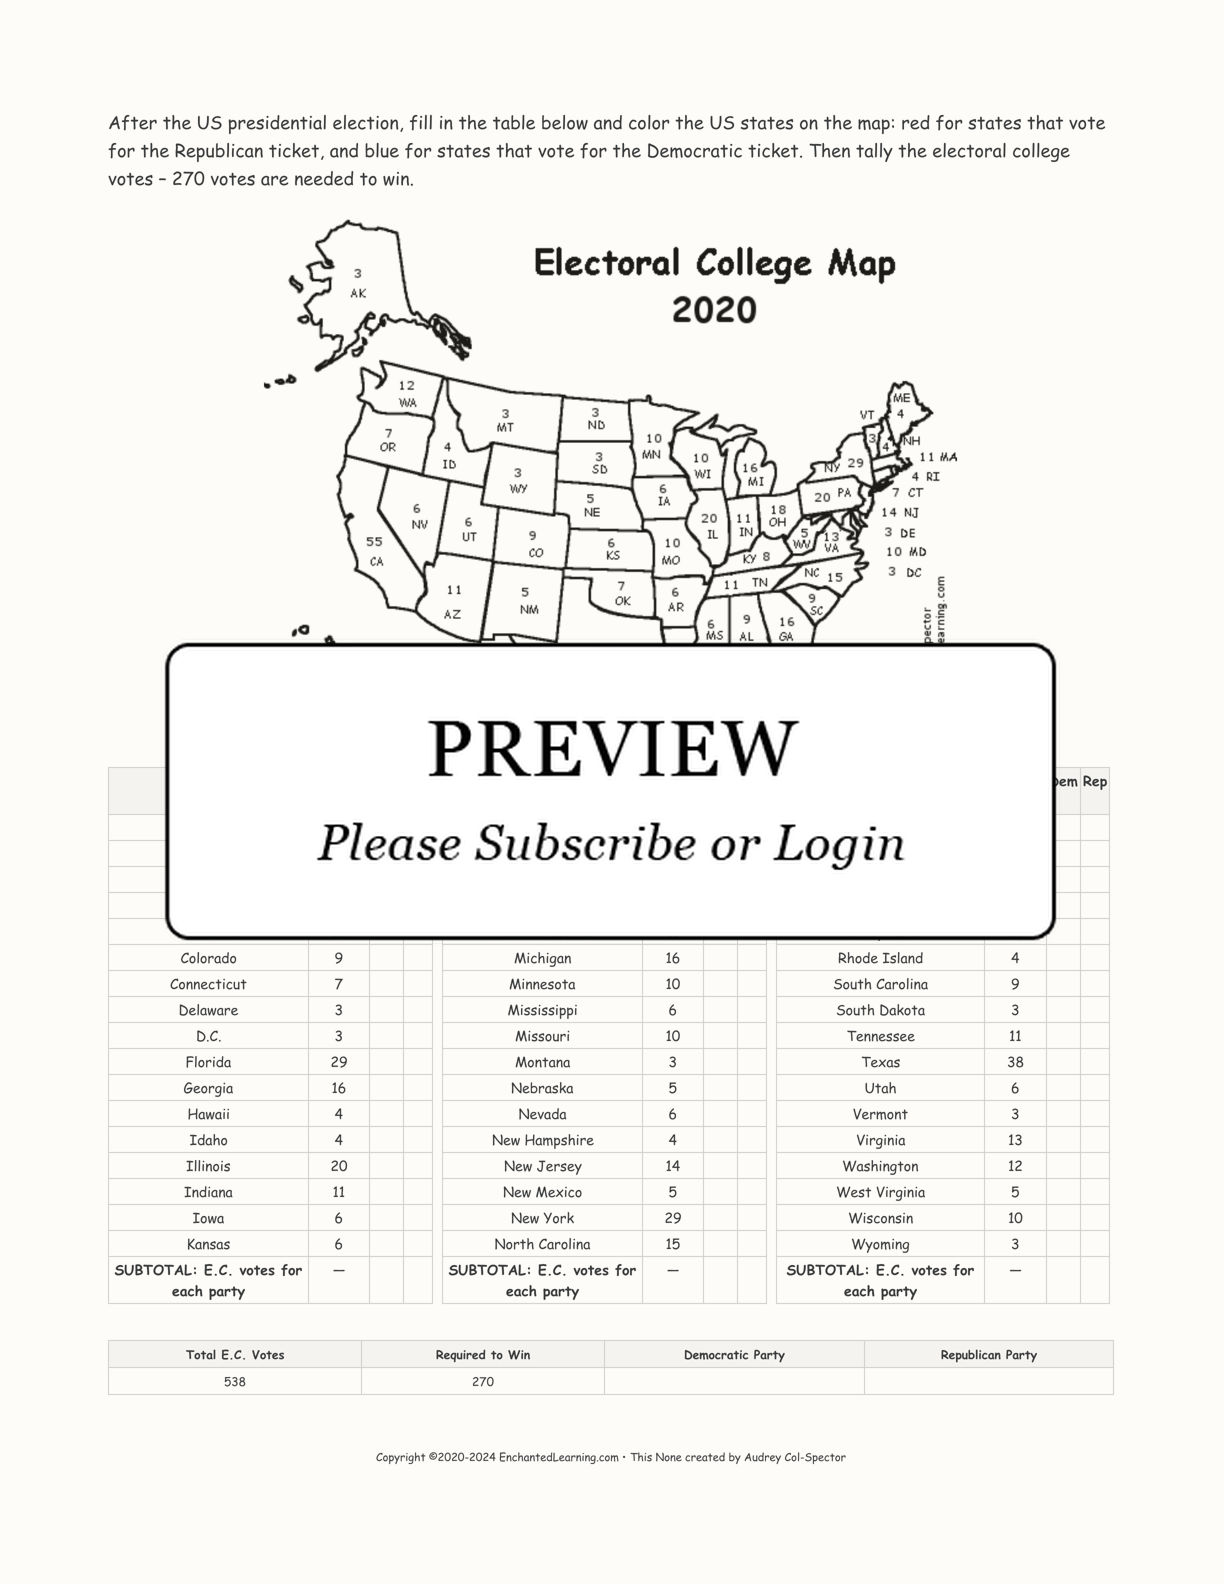 Electoral College Map Coloring Activity 2020 interactive worksheet page 1